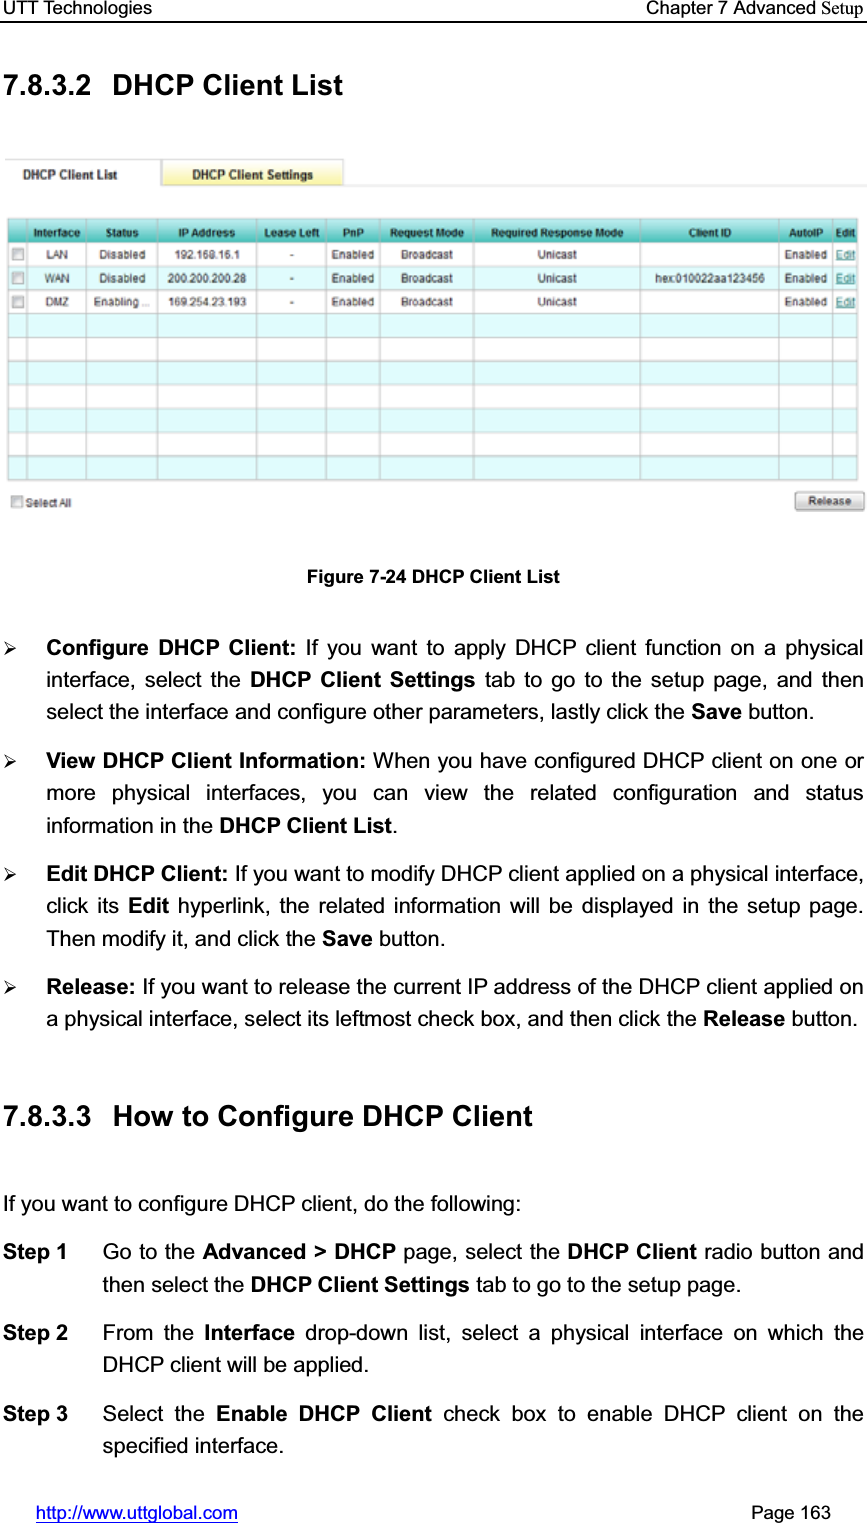 UTT Technologies    Chapter 7 Advanced Setuphttp://www.uttglobal.com                                                       Page 163 7.8.3.2 DHCP Client List Figure 7-24 DHCP Client List ¾Configure DHCP Client: If you want to apply DHCP client function on a physical interface, select the DHCP Client Settings tab to go to the setup page, and then select the interface and configure other parameters, lastly click the Save button. ¾View DHCP Client Information: When you have configured DHCP client on one or more physical interfaces, you can view the related configuration and status information in the DHCP Client List.¾Edit DHCP Client: If you want to modify DHCP client applied on a physical interface, click its Edit hyperlink, the related information will be displayed in the setup page. Then modify it, and click the Save button. ¾Release: If you want to release the current IP address of the DHCP client applied on a physical interface, select its leftmost check box, and then click the Release button. 7.8.3.3  How to Configure DHCP Client If you want to configure DHCP client, do the following:   Step 1  Go to the Advanced &gt; DHCP page, select the DHCP Client radio button and then select the DHCP Client Settings tab to go to the setup page. Step 2  From the Interface drop-down list, select a physical interface on which the DHCP client will be applied. Step 3  Select the Enable DHCP Client check box to enable DHCP client on the specified interface. 